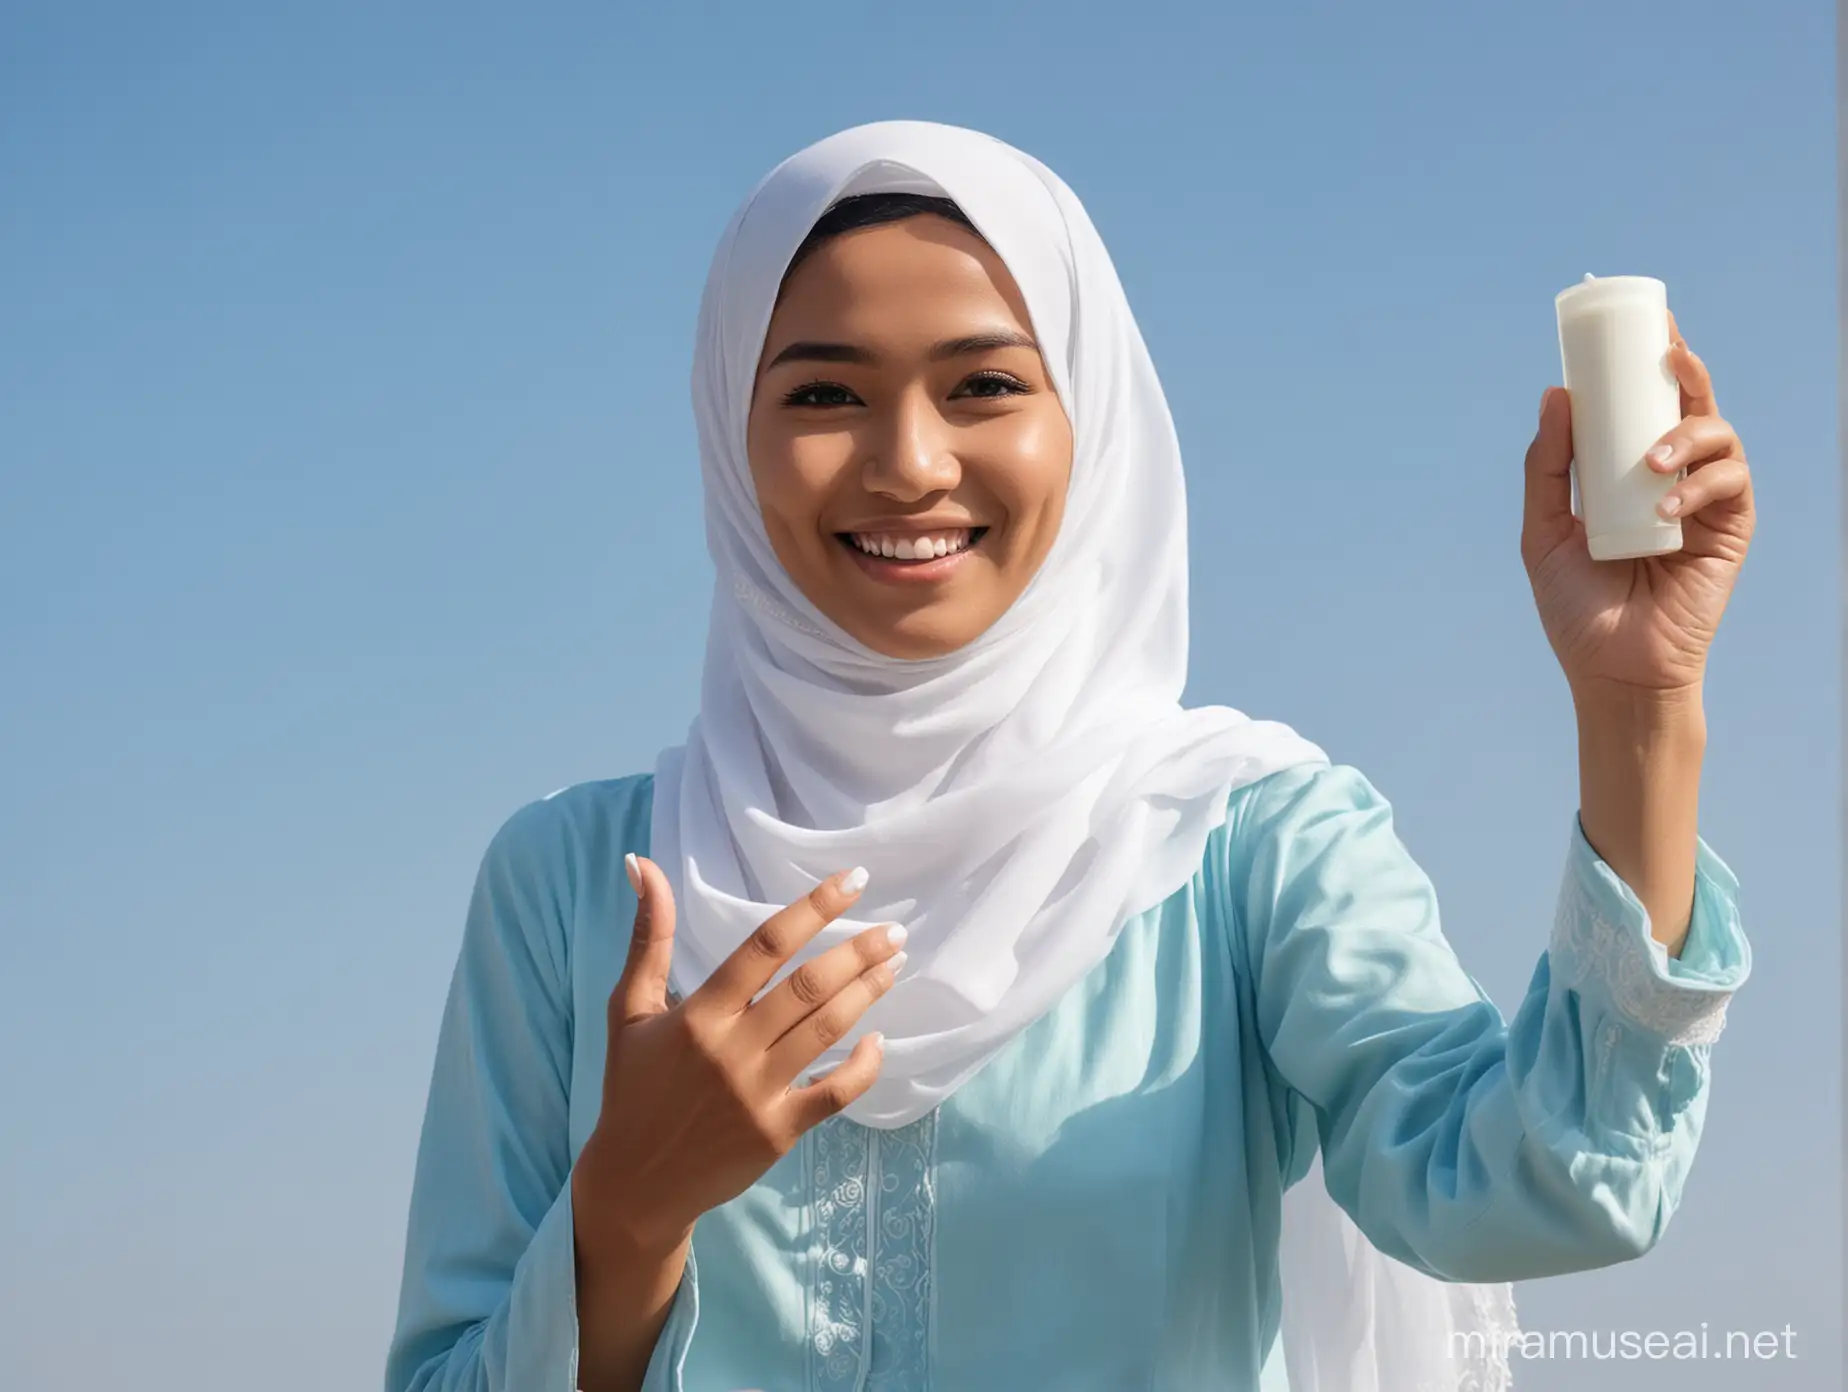 smiling indonesian muslim wearing white veil adn blue clothing, raising her hand and applying body lotion on her arm, with blue sky background